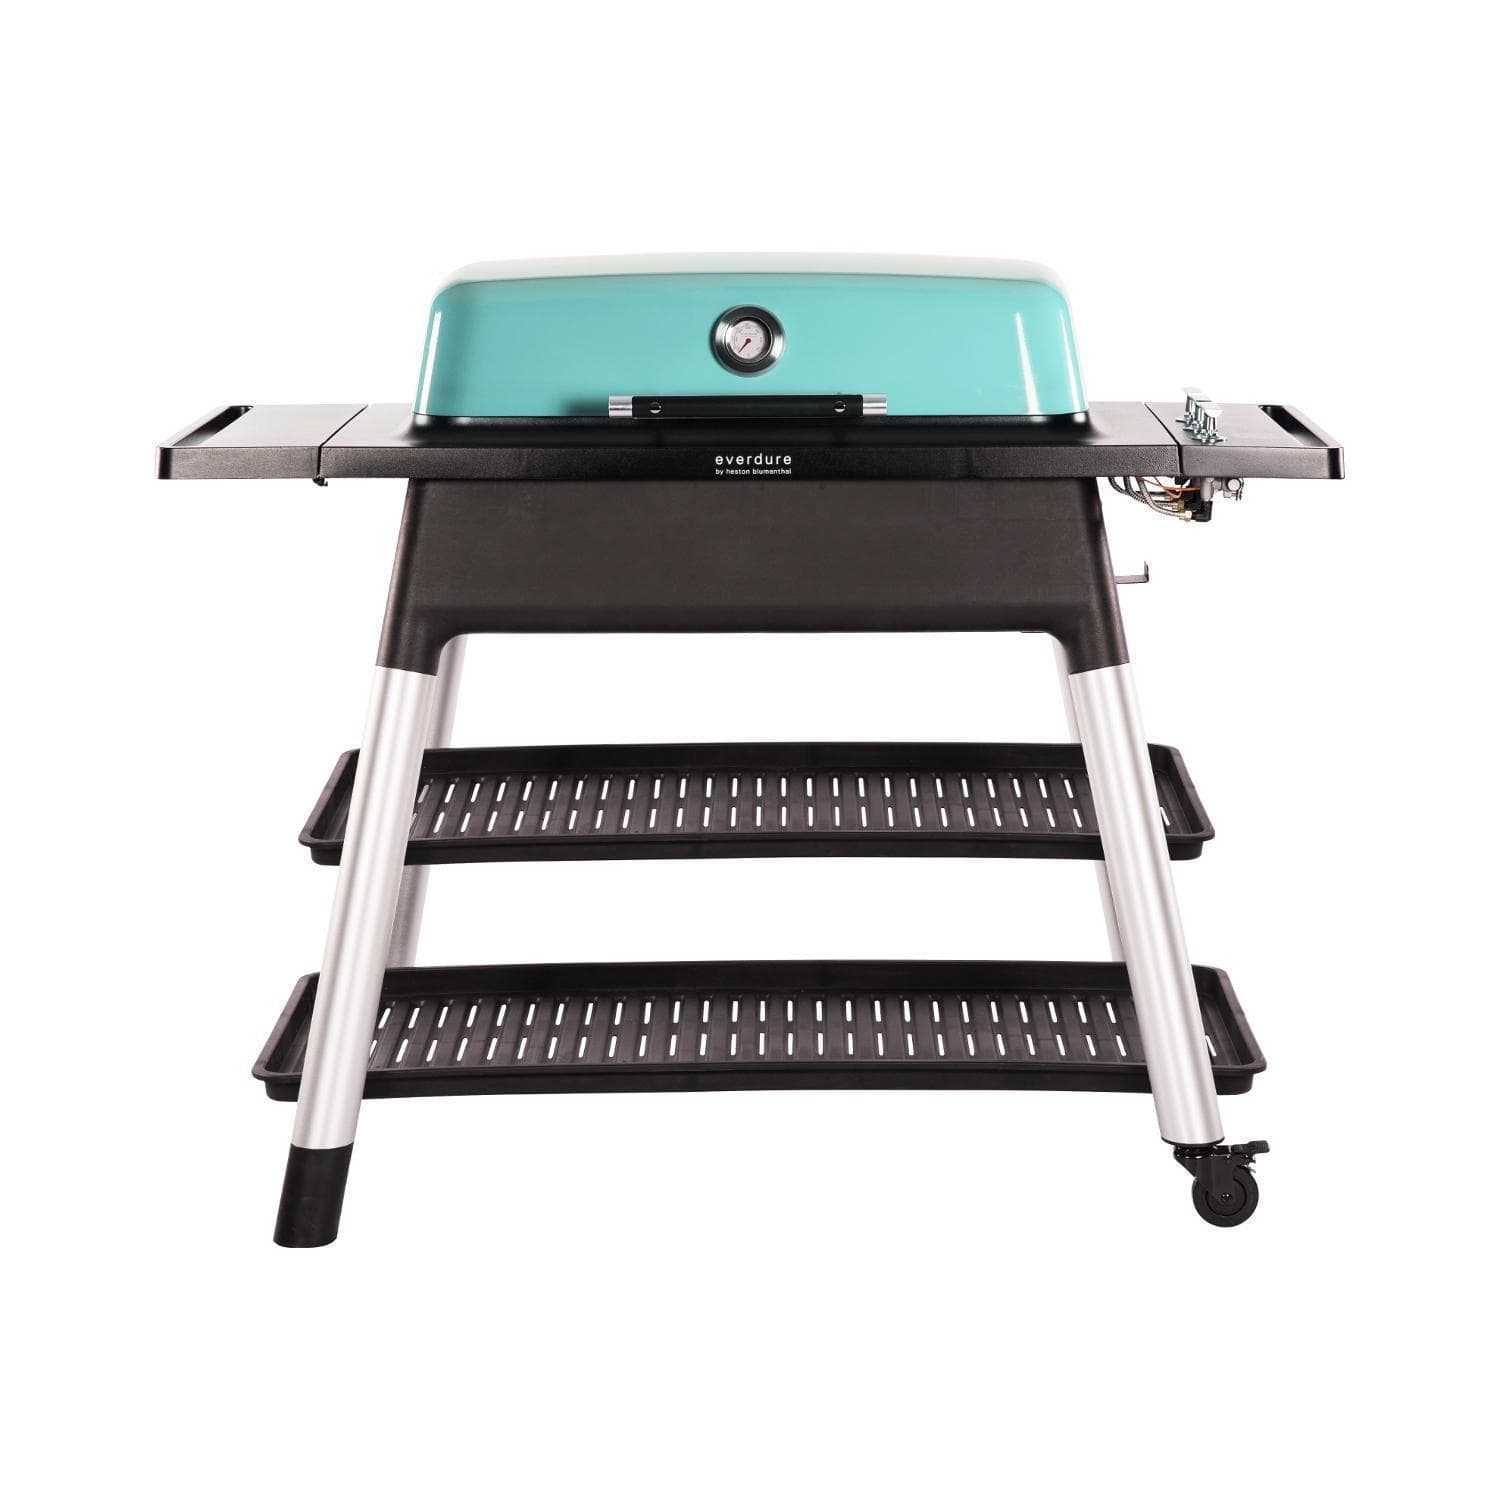 Everdure Propane Gas Grill Mint Everdure By Heston Blumenthal FURNACE 52-Inch 3-Burner Propane Gas Grill With Stand